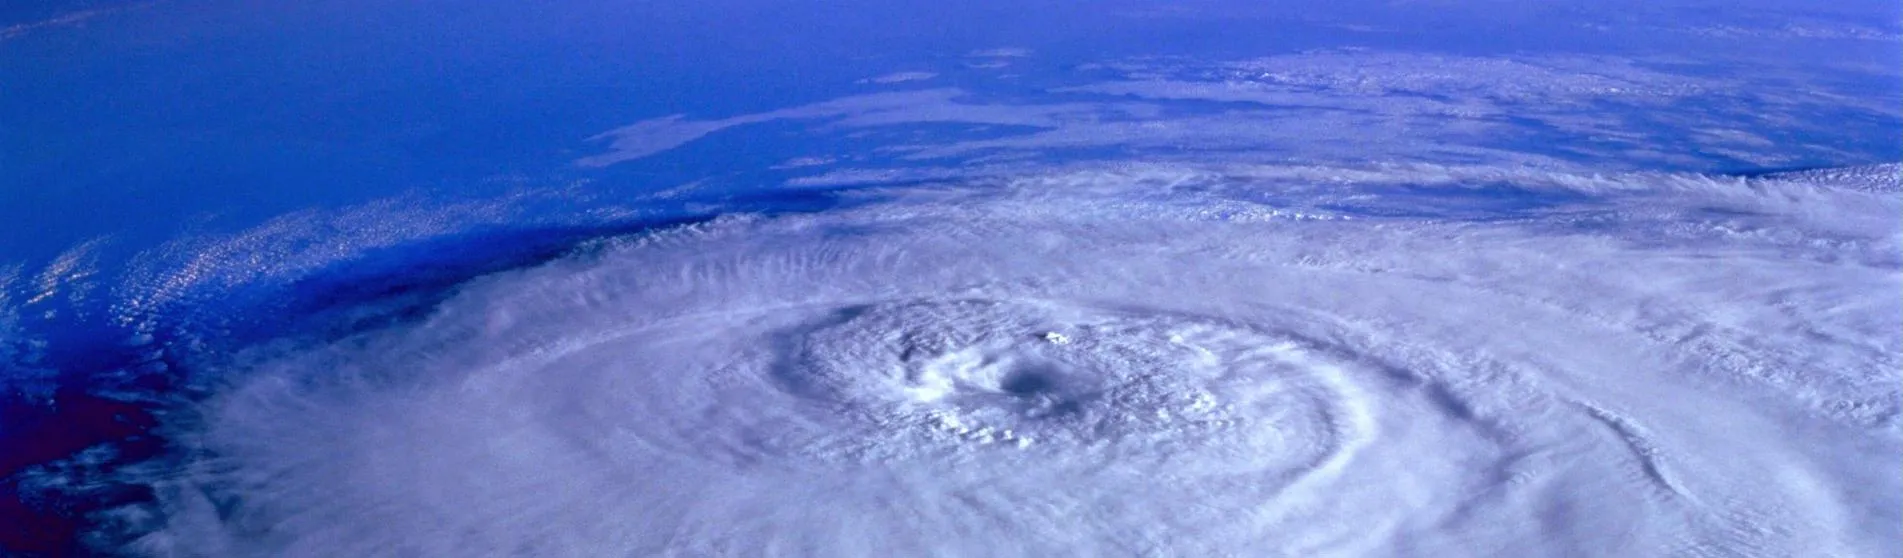 Eye of the Storm Image from Outer Space
